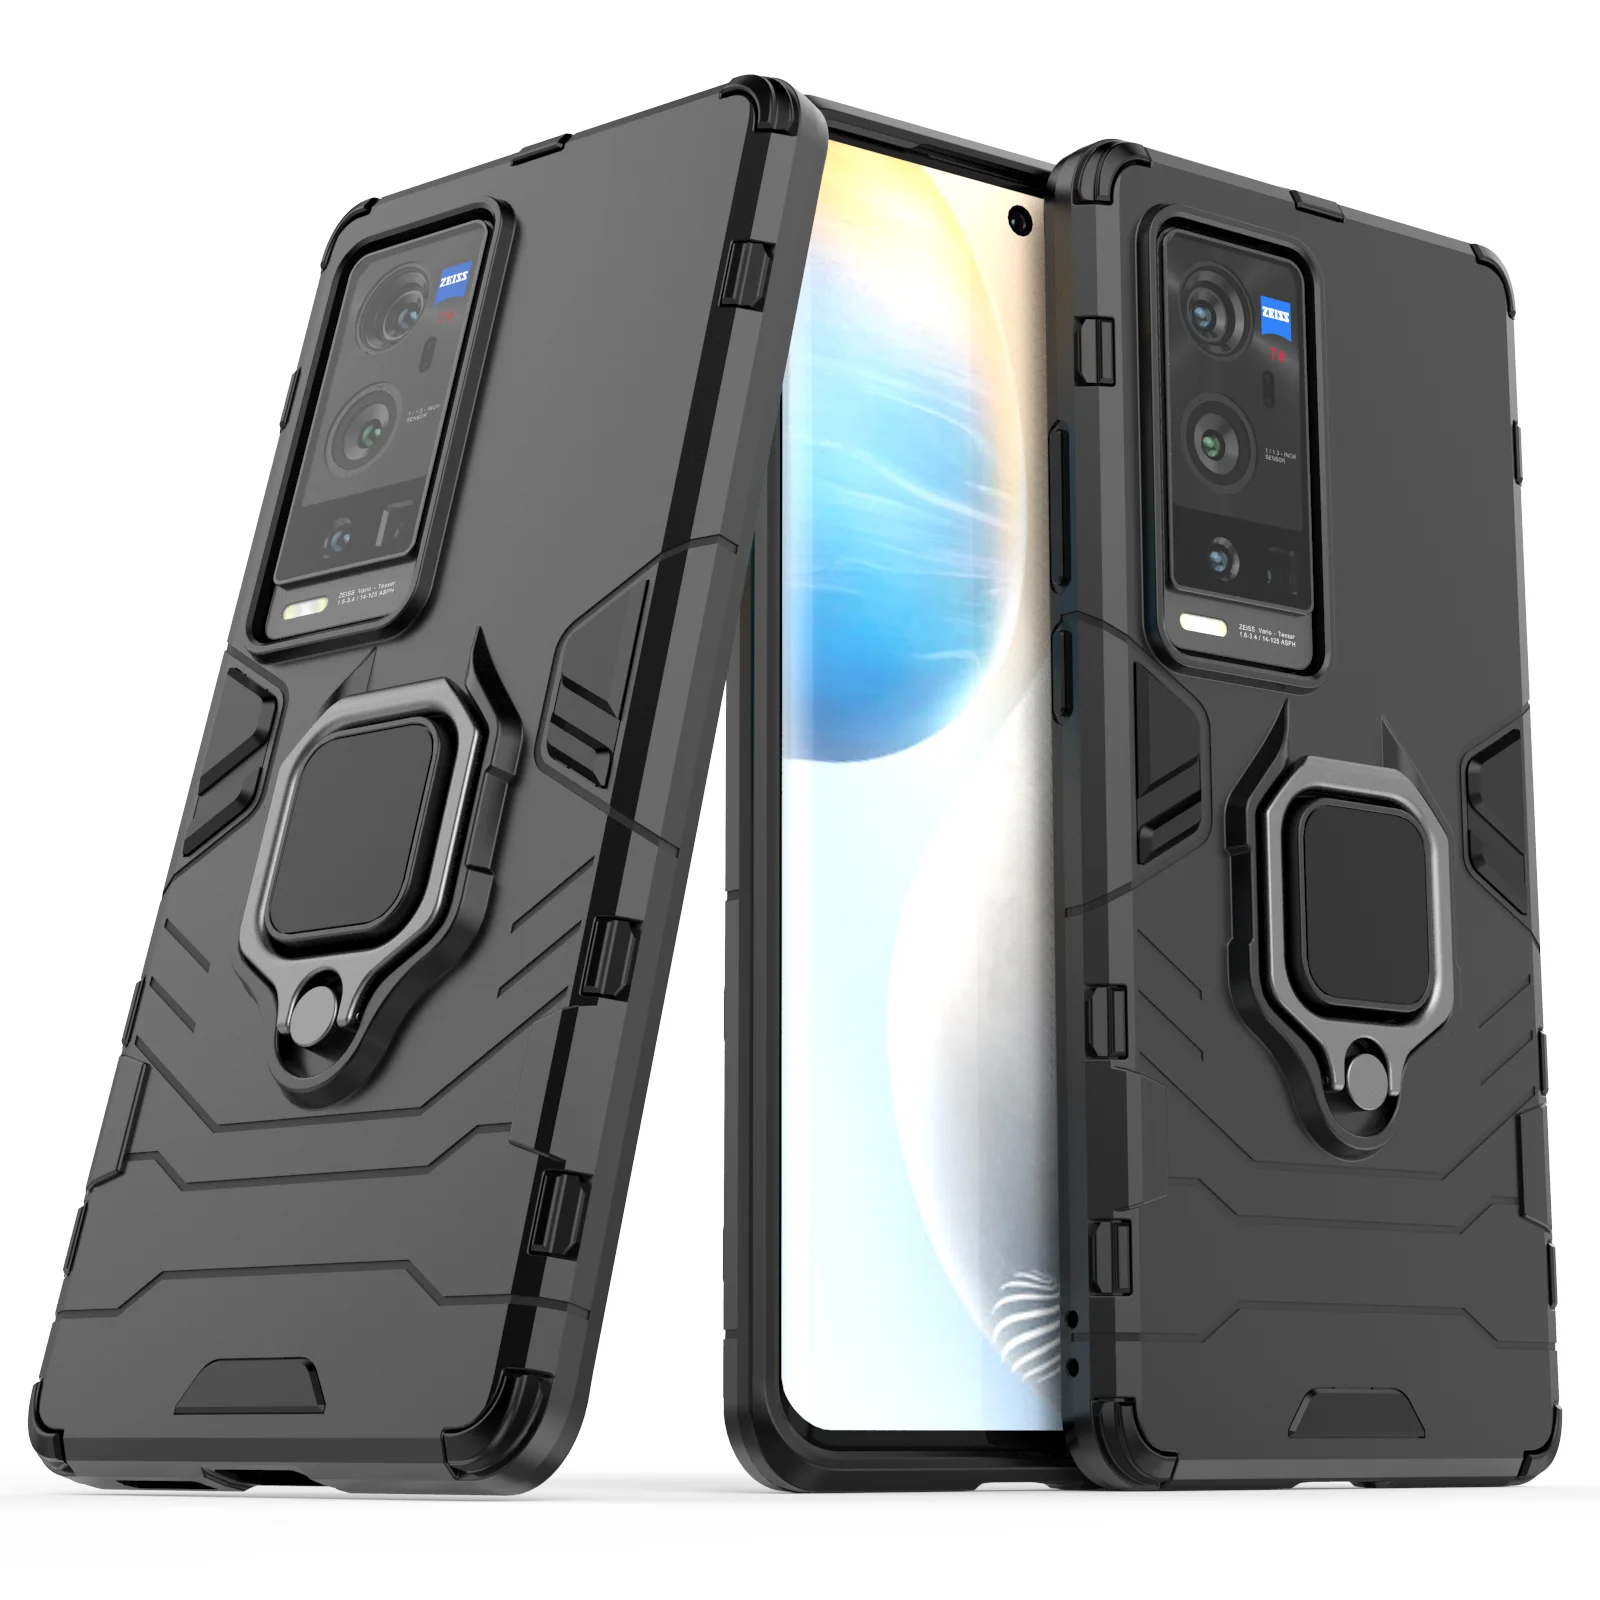 

Shockproof Phone cover for Vivo X60 X50 X30 X27 X23 X20 X21 X9 Pro plus business phone cases